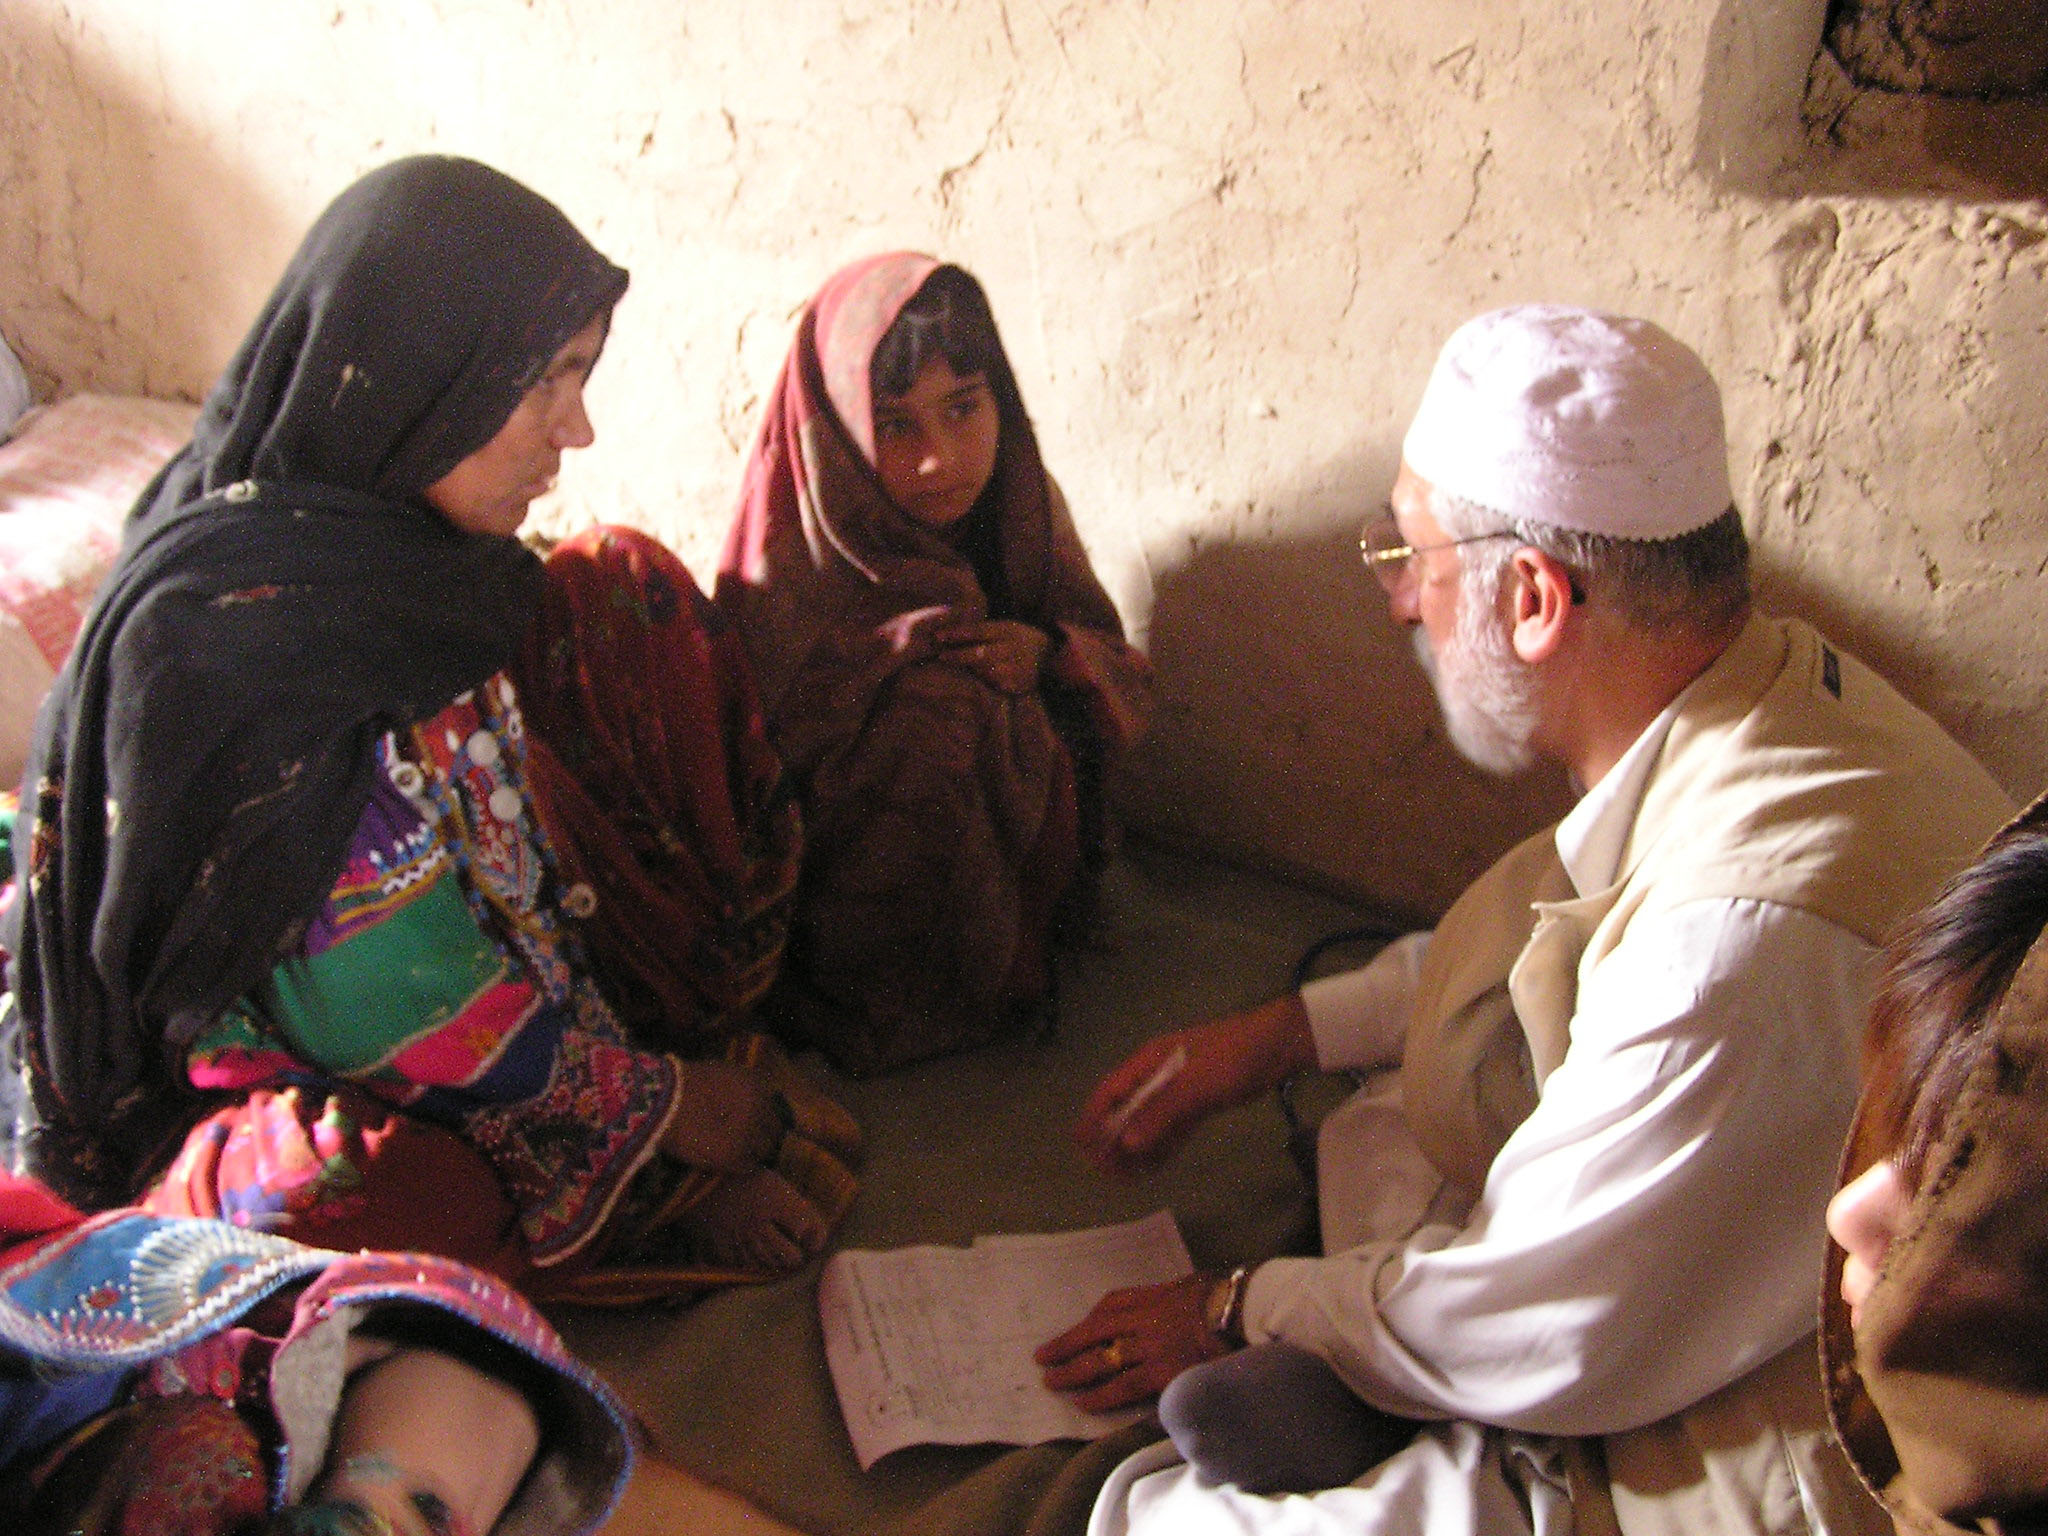 Khaled Reshad provides health advice to a woman and a girl during a visit to a village, which at the time had no resident doctor, in rural Afghanistan in May 2004. | COURTESY OF KHALED RESHAD